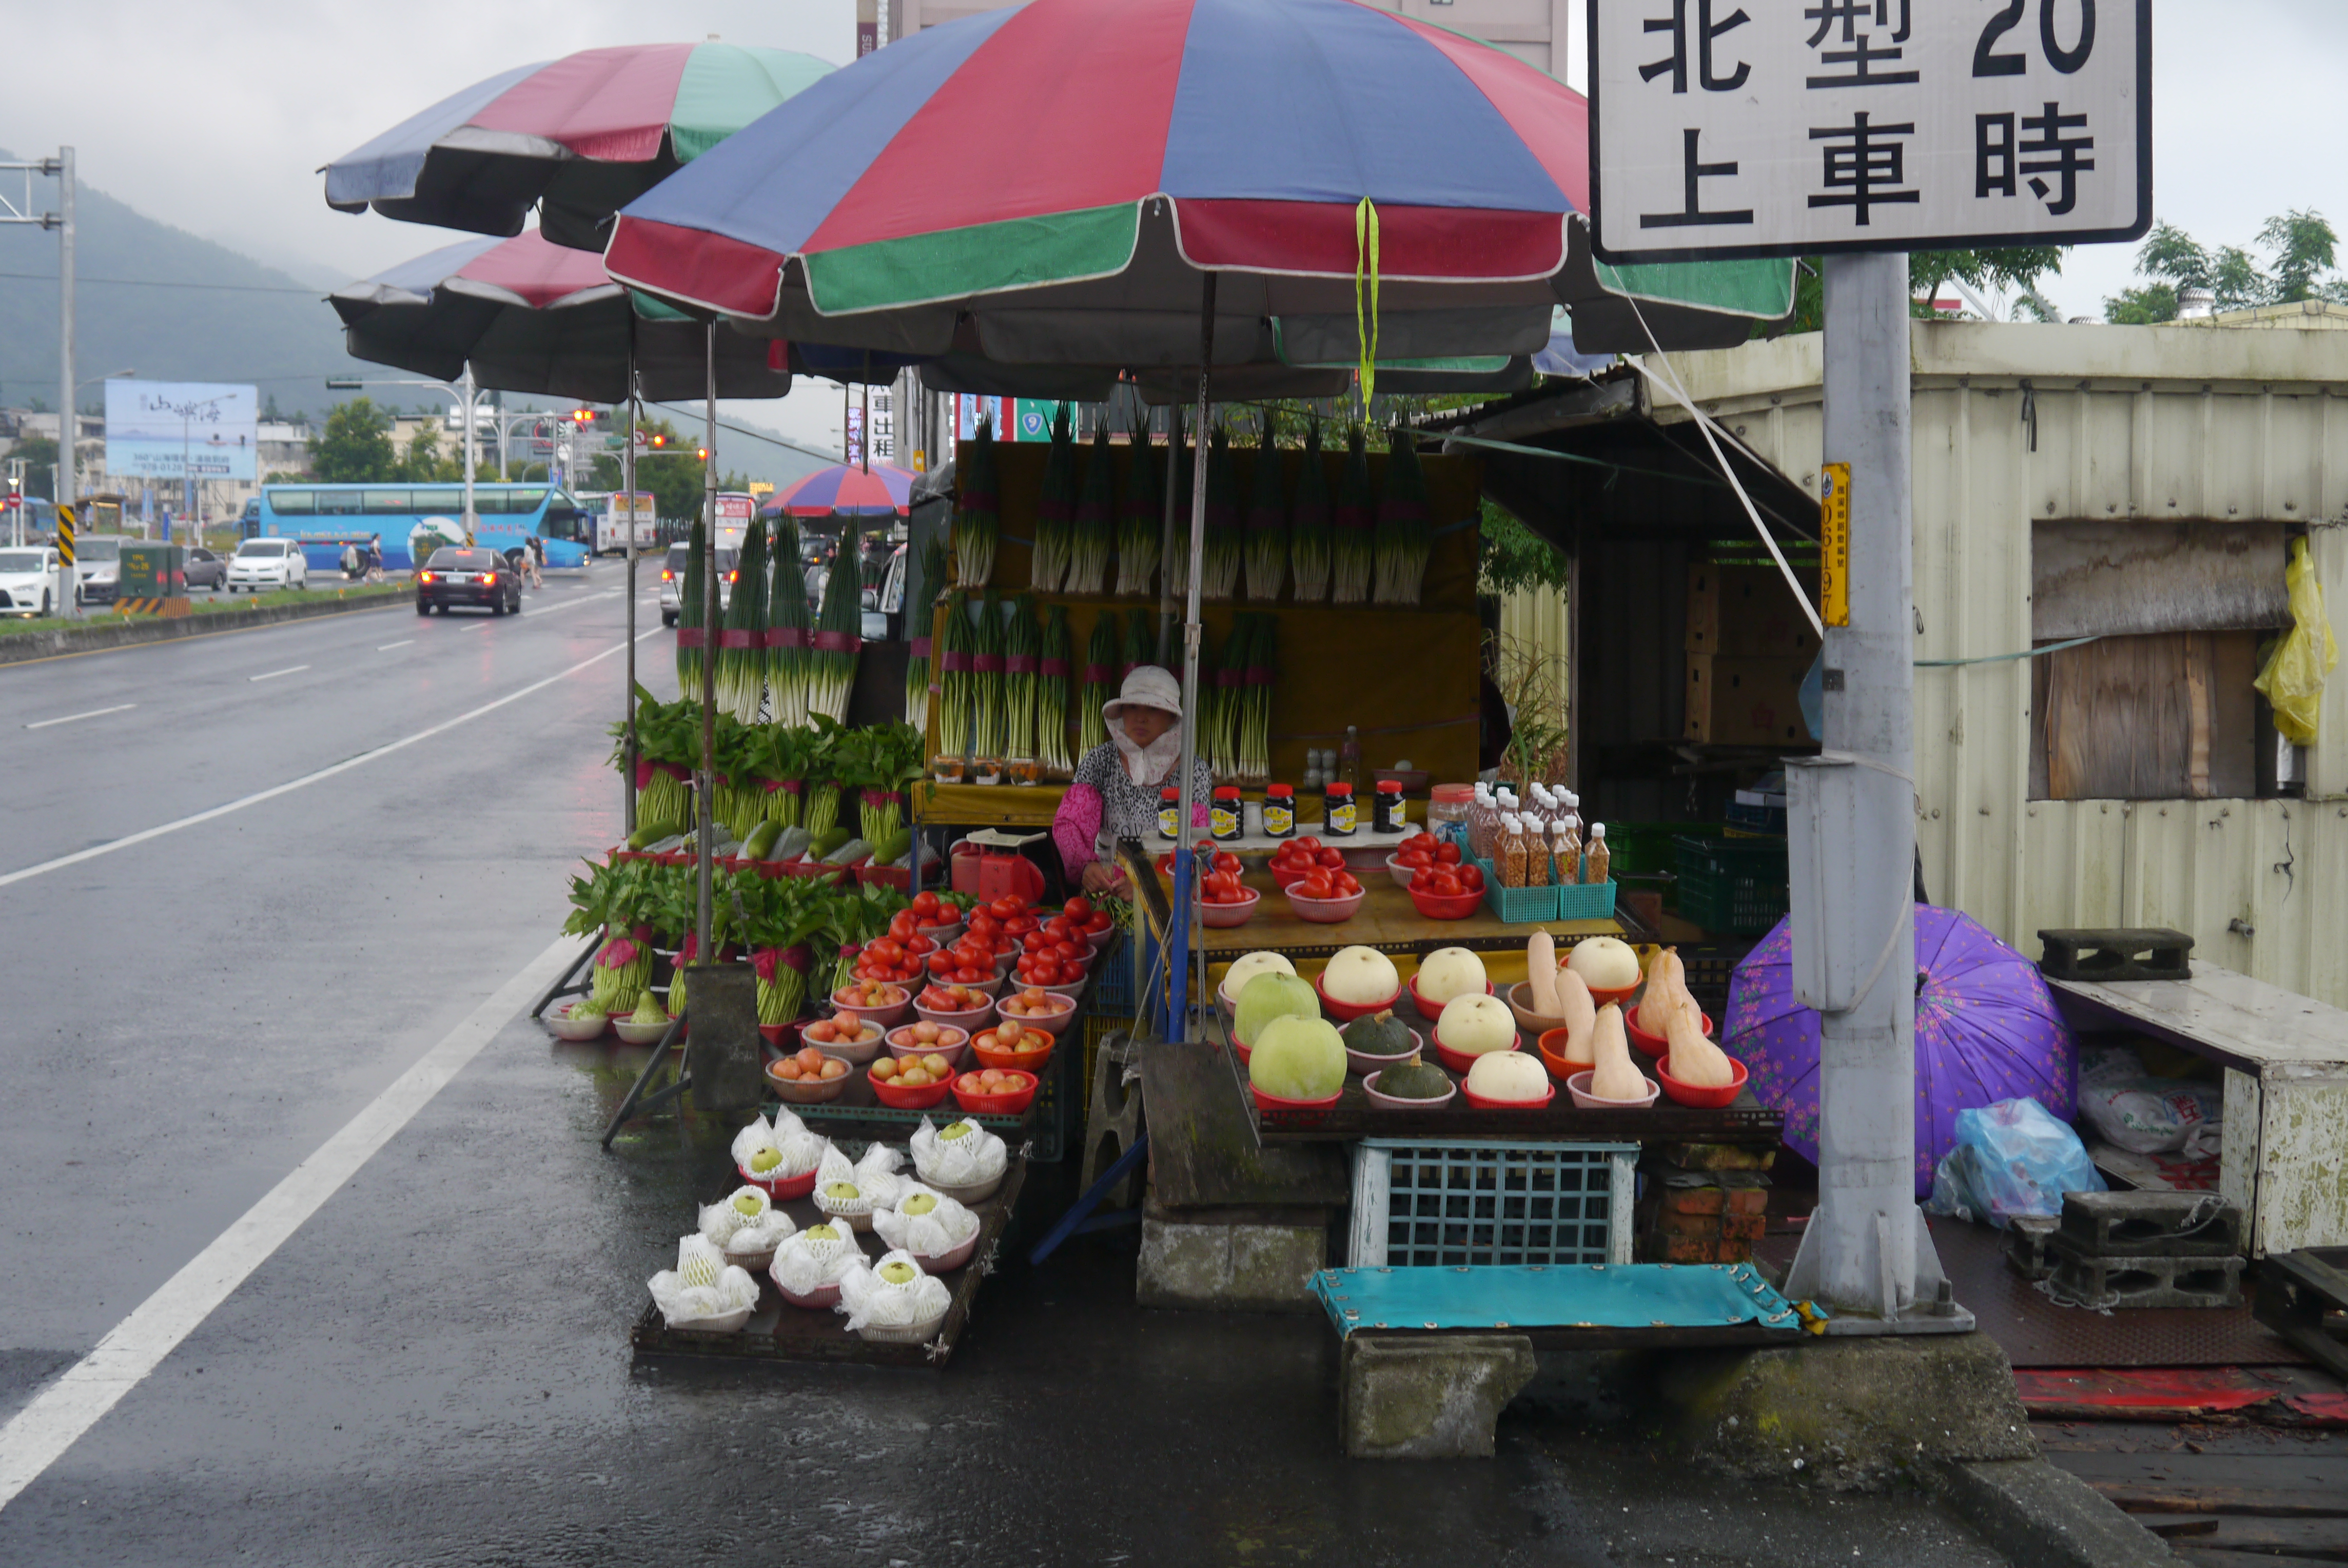 An extremely well-organised fruit and veg seller.